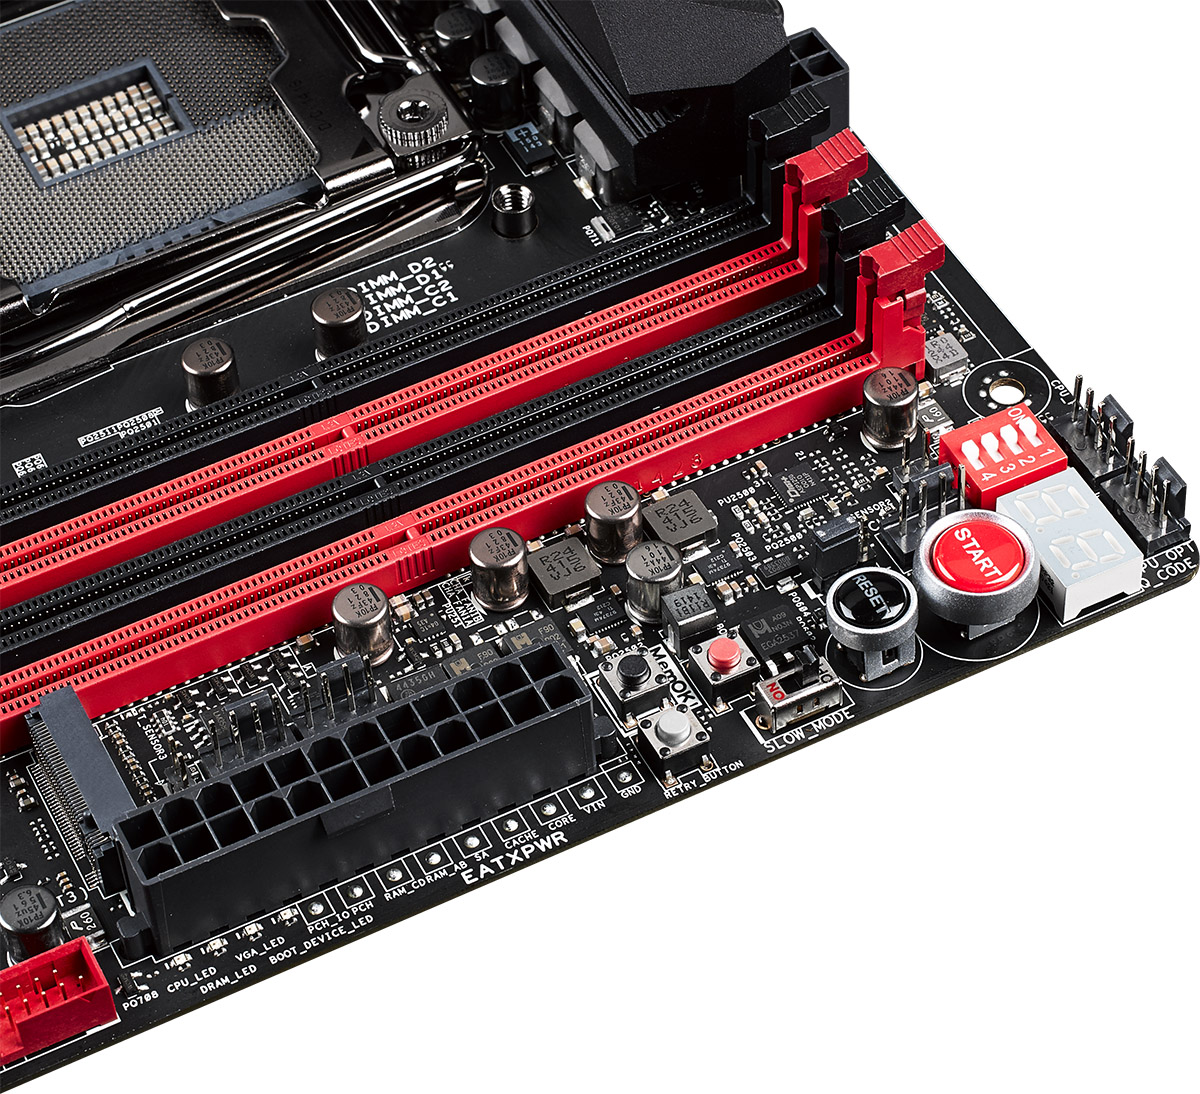 Asus Rampage V Extreme X99 Motherboard Wants You If Youre An